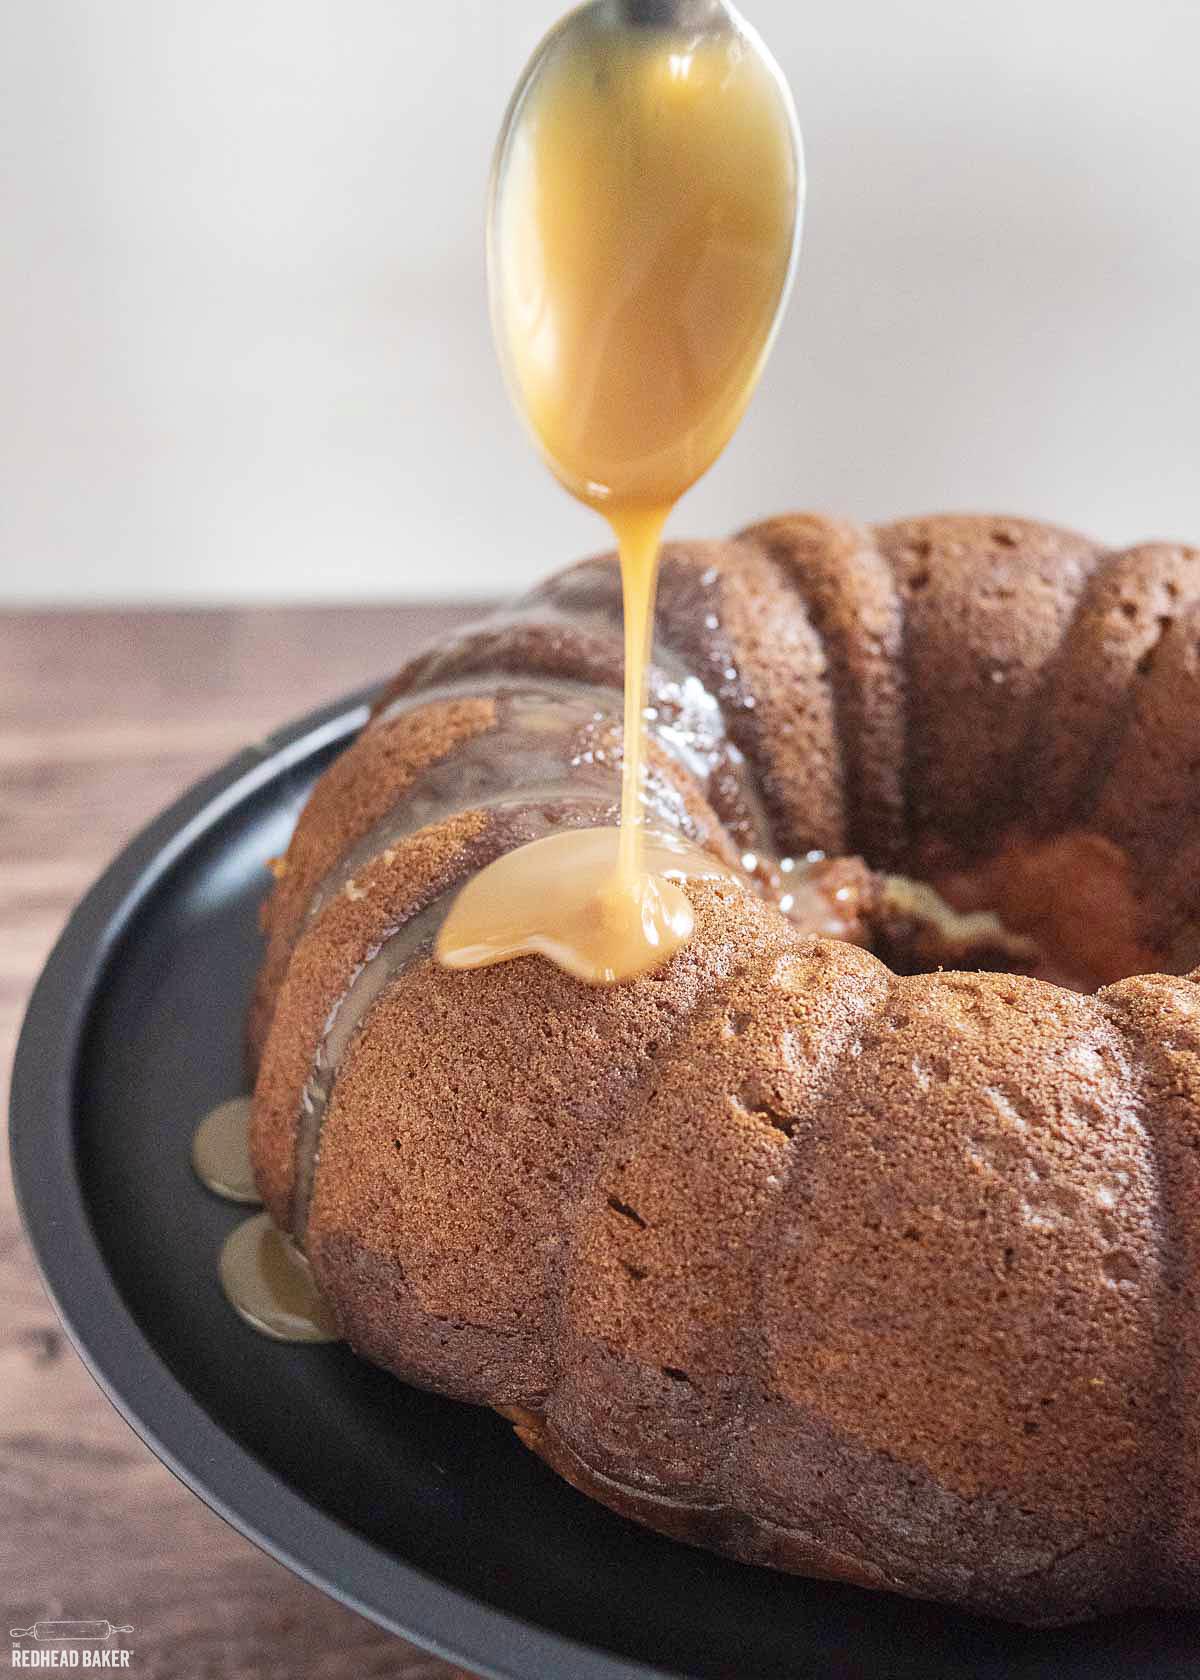 Caramel sauce being drizzled on a bundt cake.